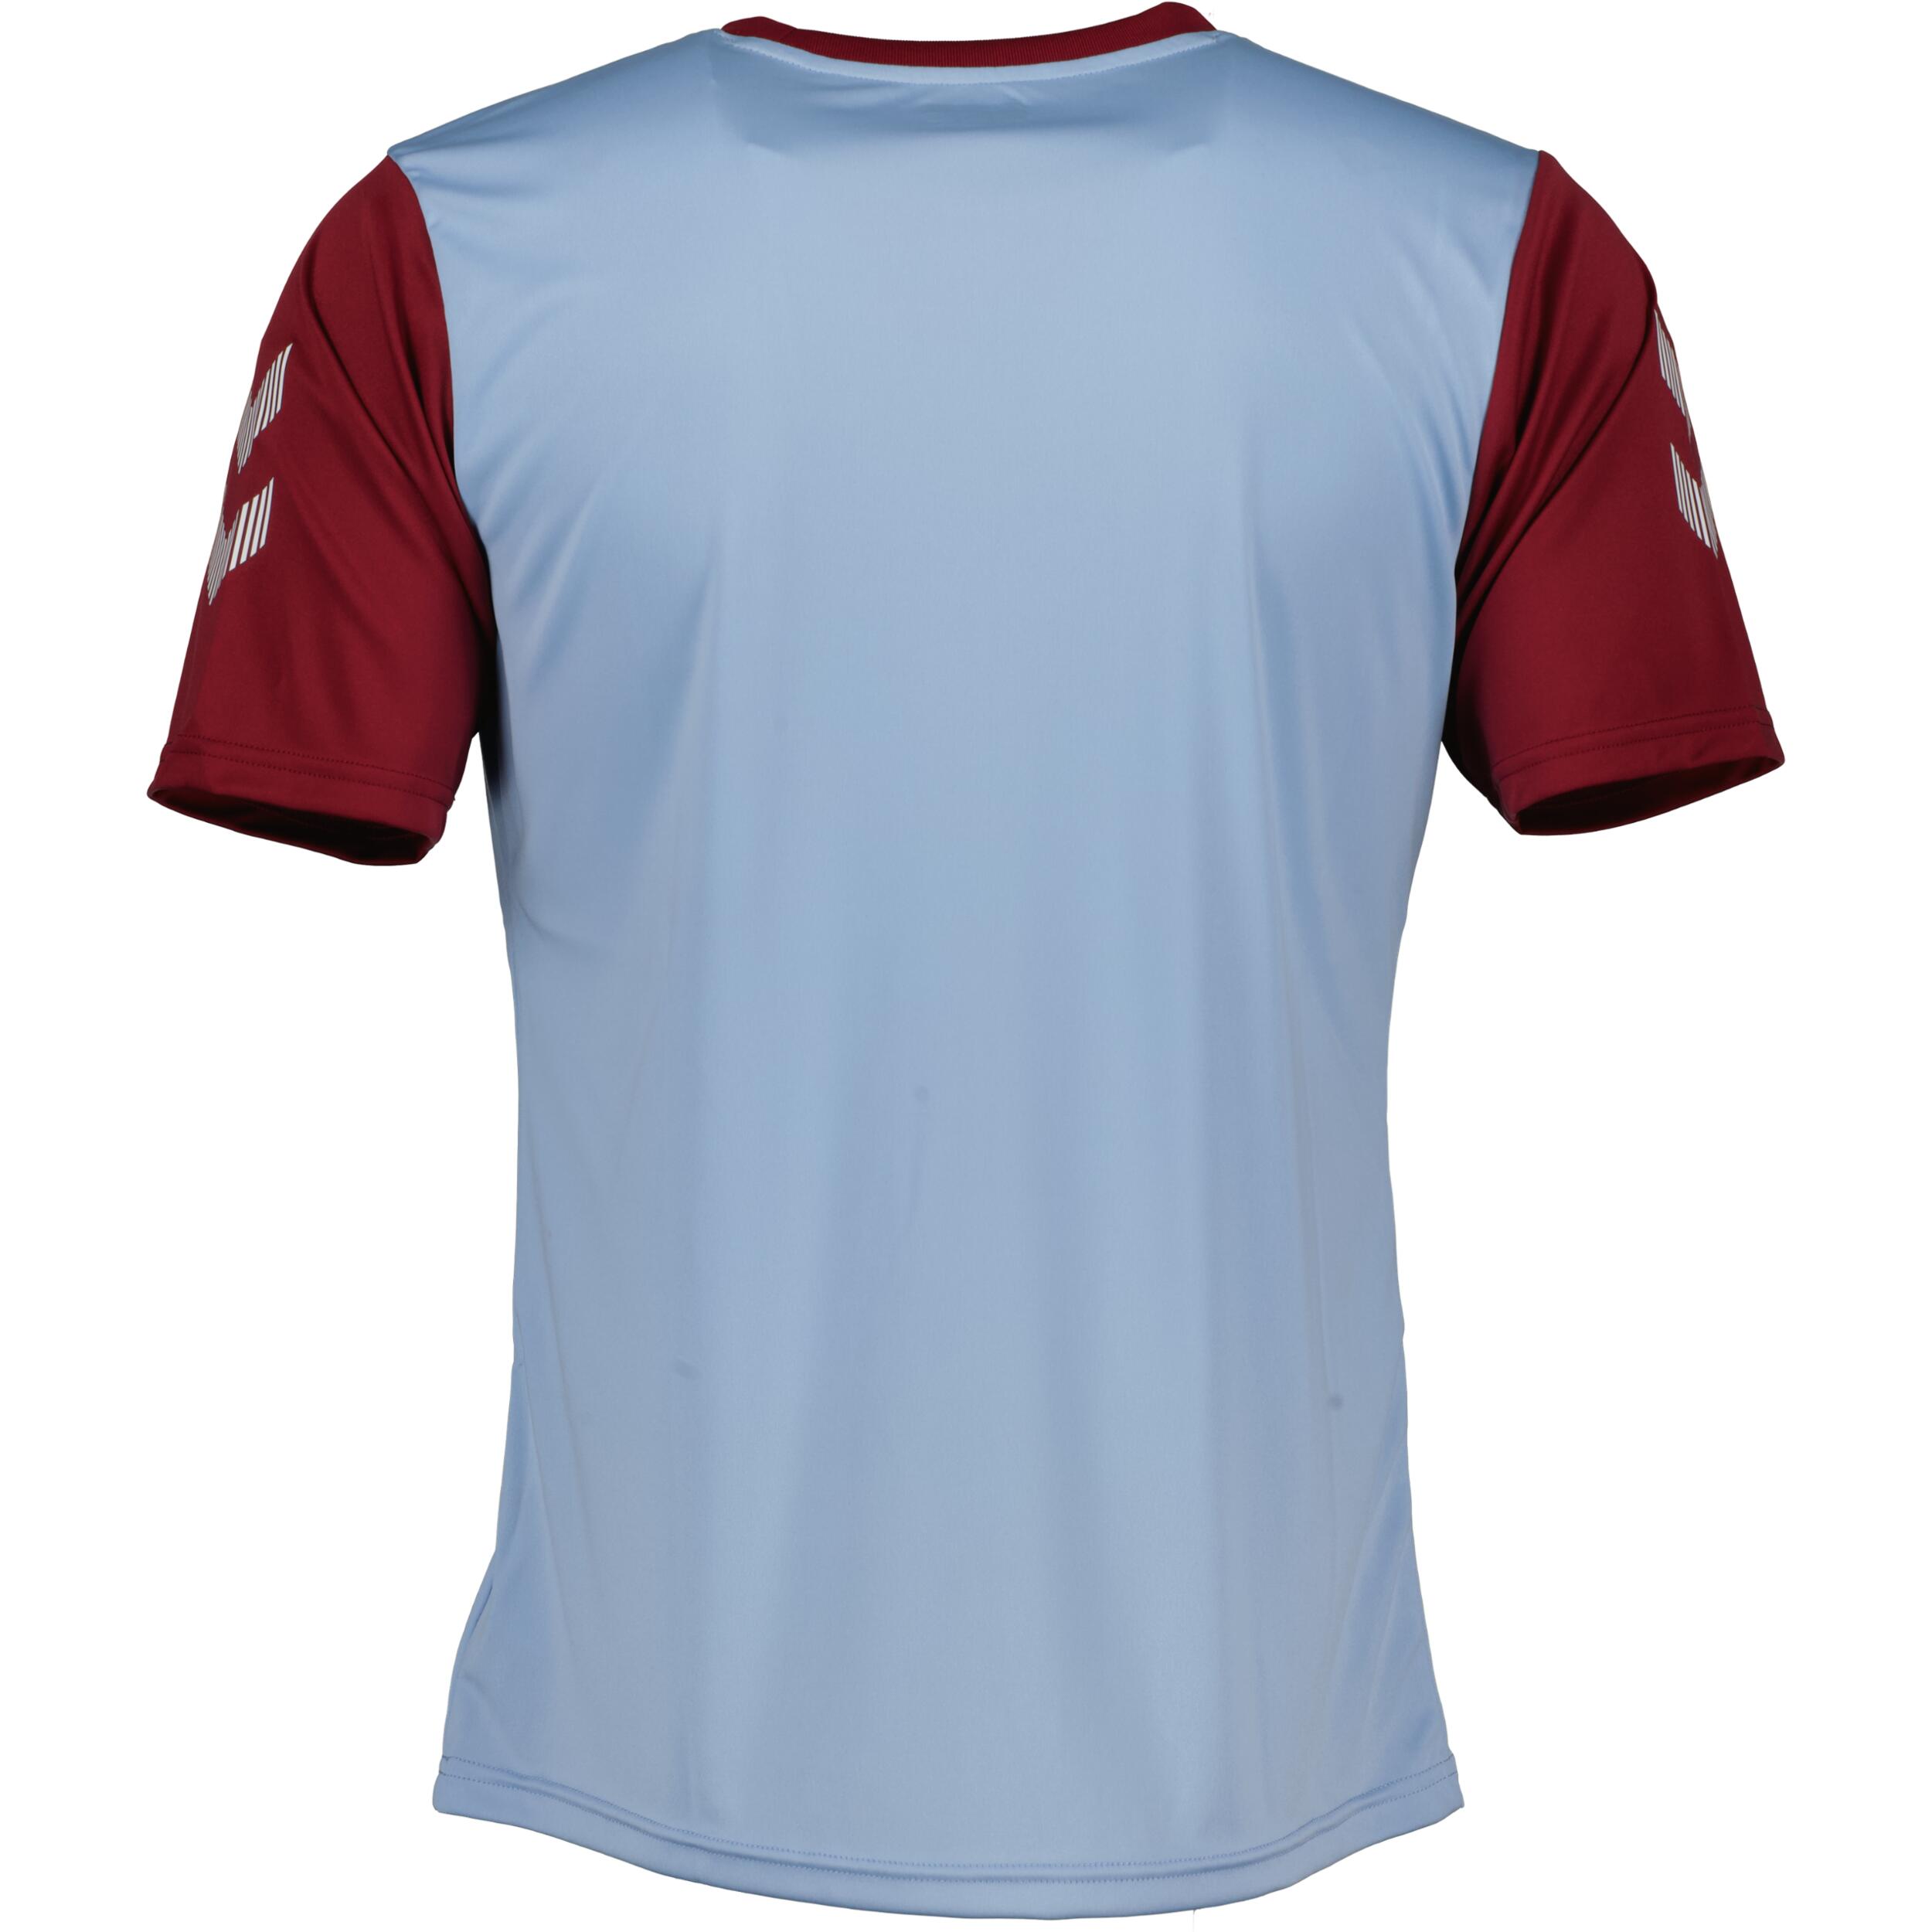 Match jersey for men, great for football, in argentina blue/maroon 2/3